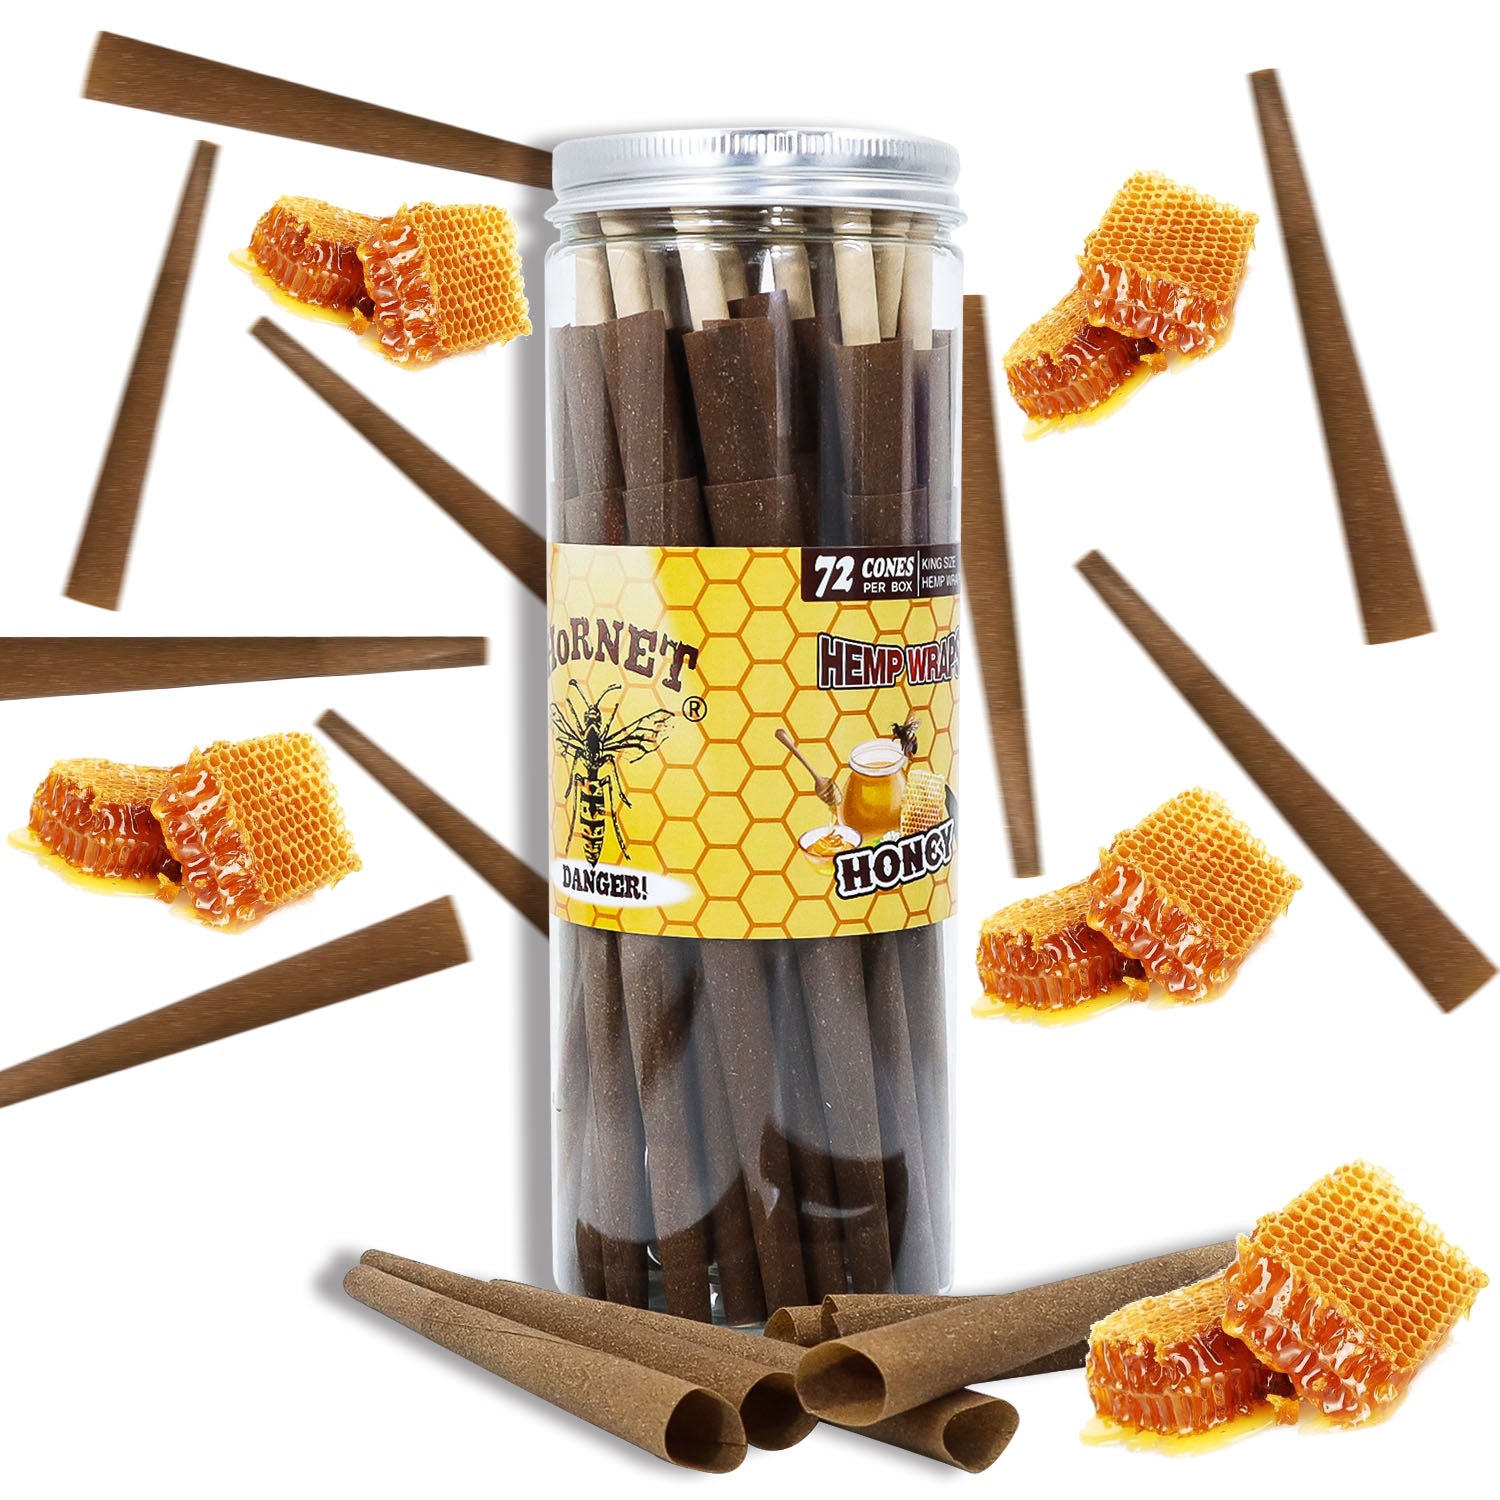 HORNET Honey Flavored Pre Rolled Cones, King Size Brown Pre Rolled Rolling Paper with tips, Slow Burning Rolling Cones & load, 72 PCS / Jar